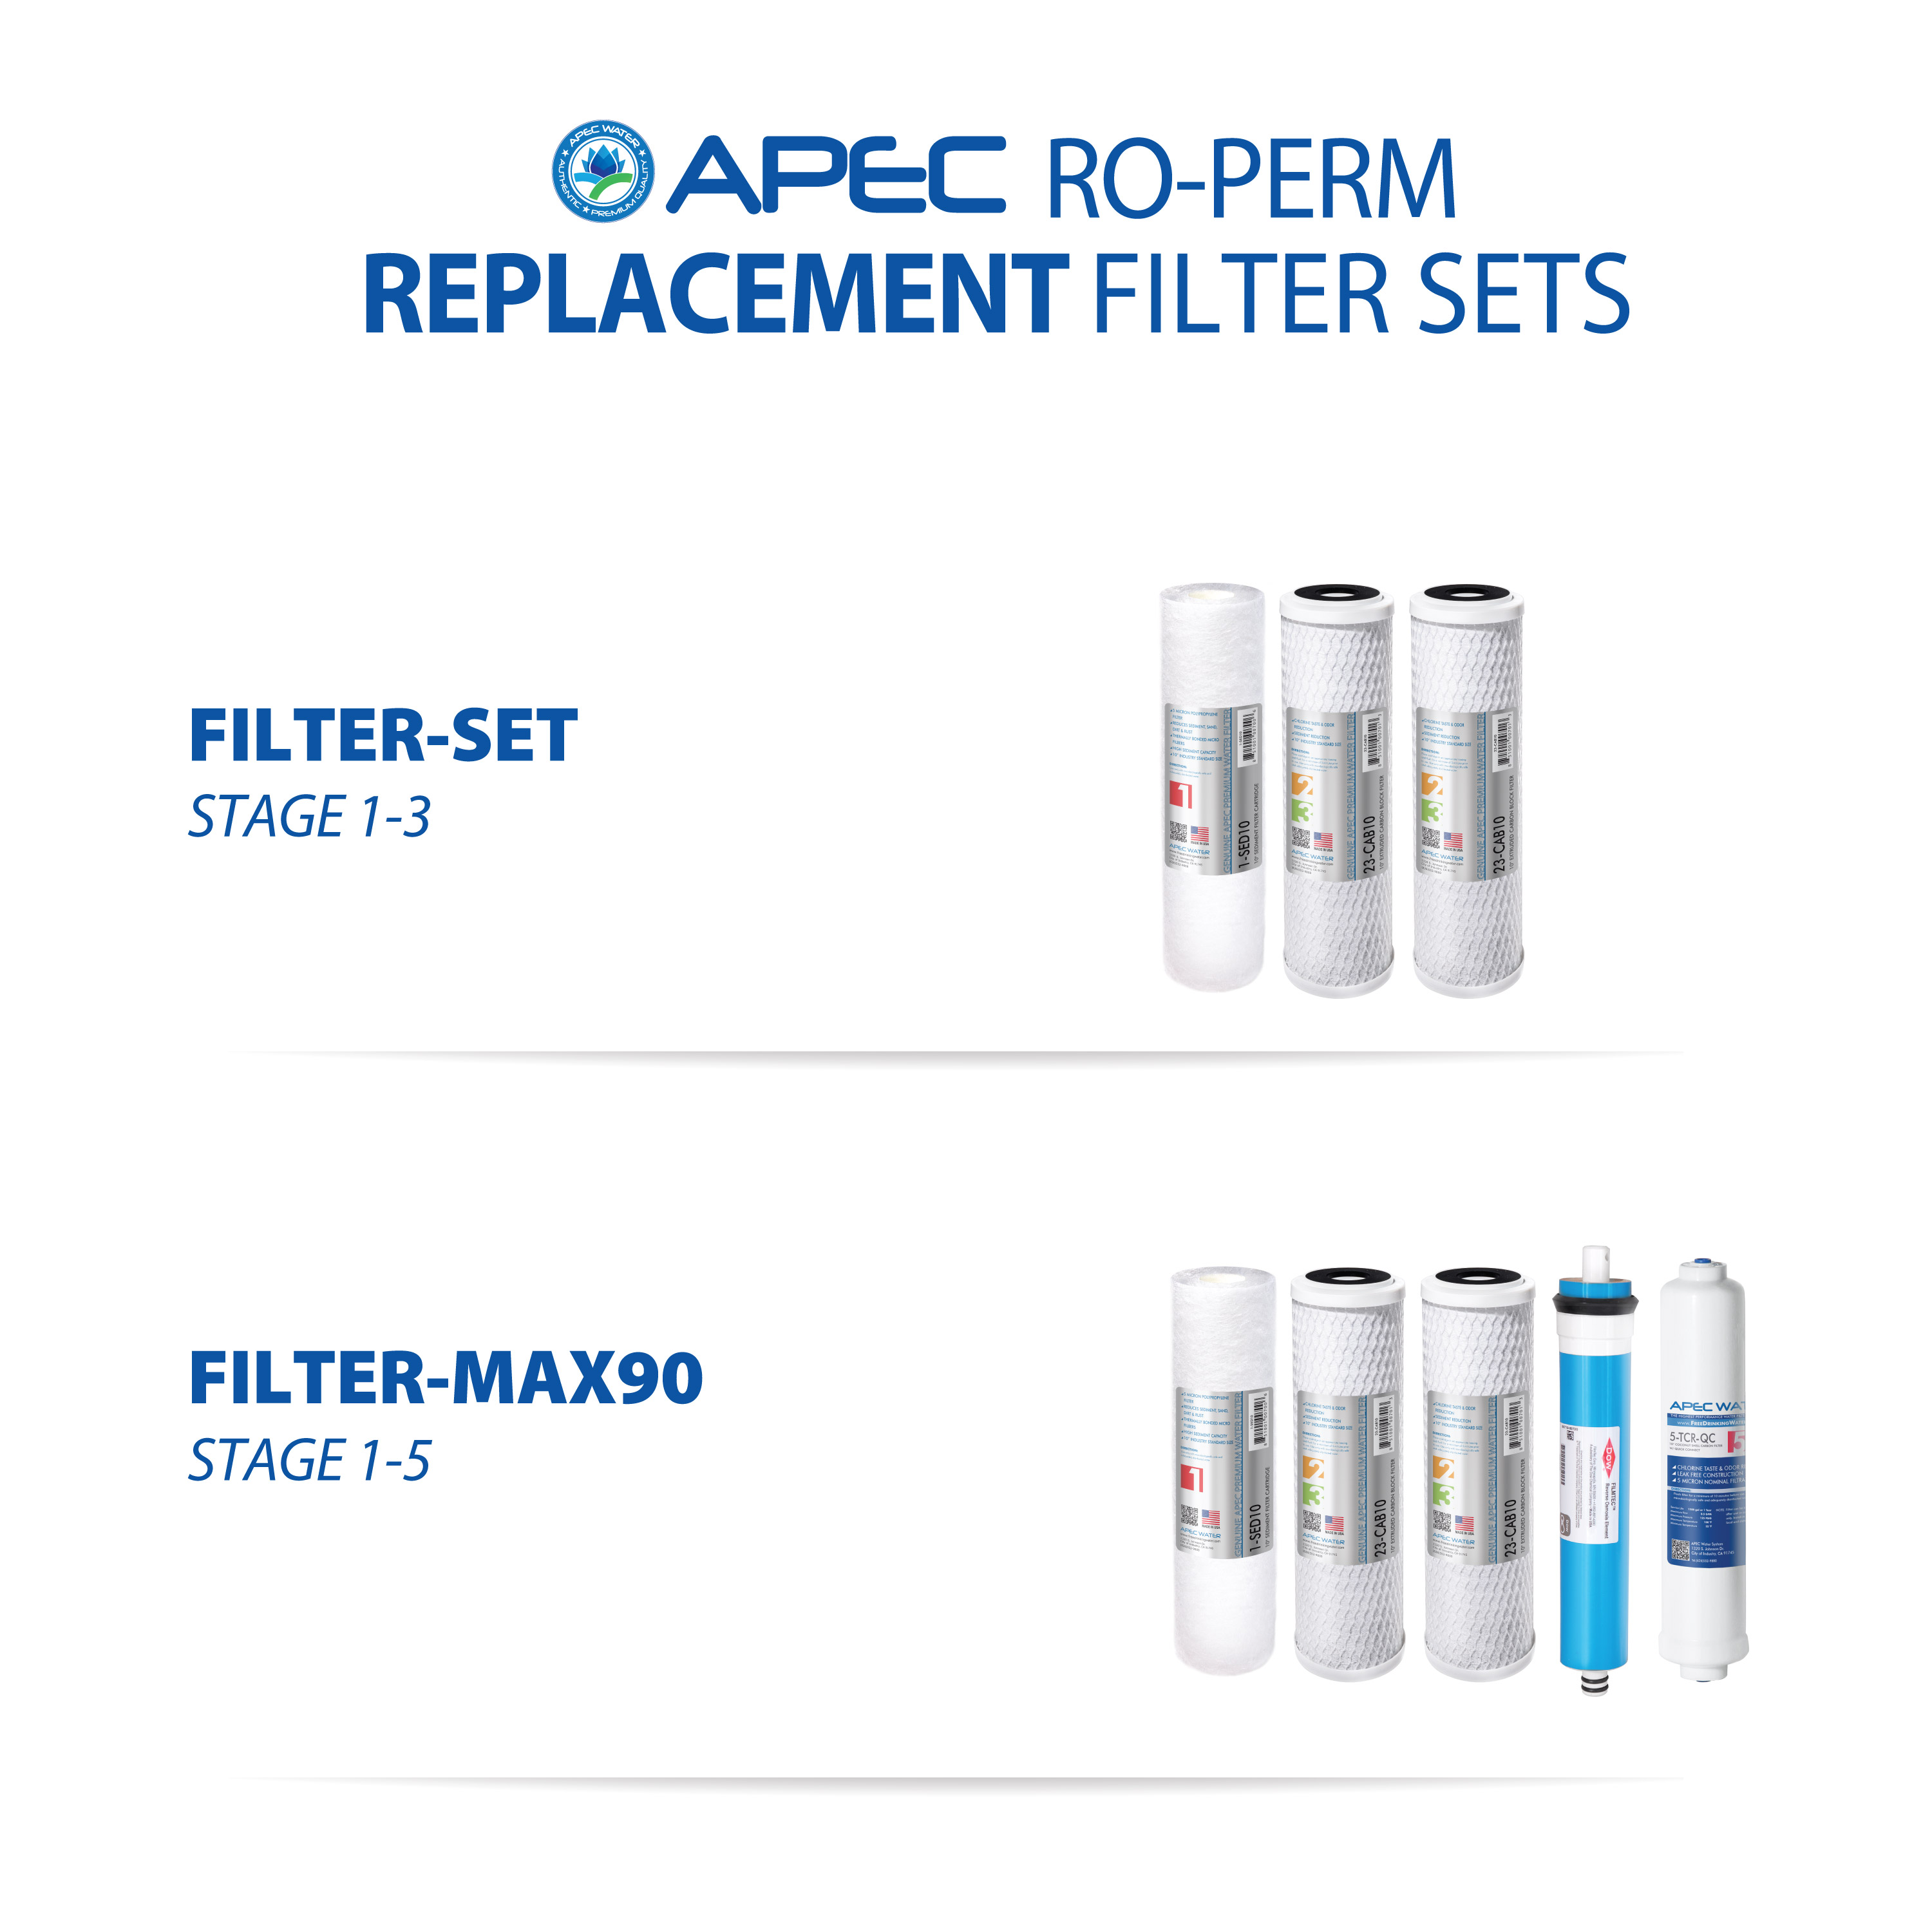 APEC Top Tier Supreme High Efficiency Permeate Pumped Ultra Safe Reverse Osmosis Drinking Water Filter System For Low Pressure Homes (ULTIMATE RO-PERM) - image 5 of 10